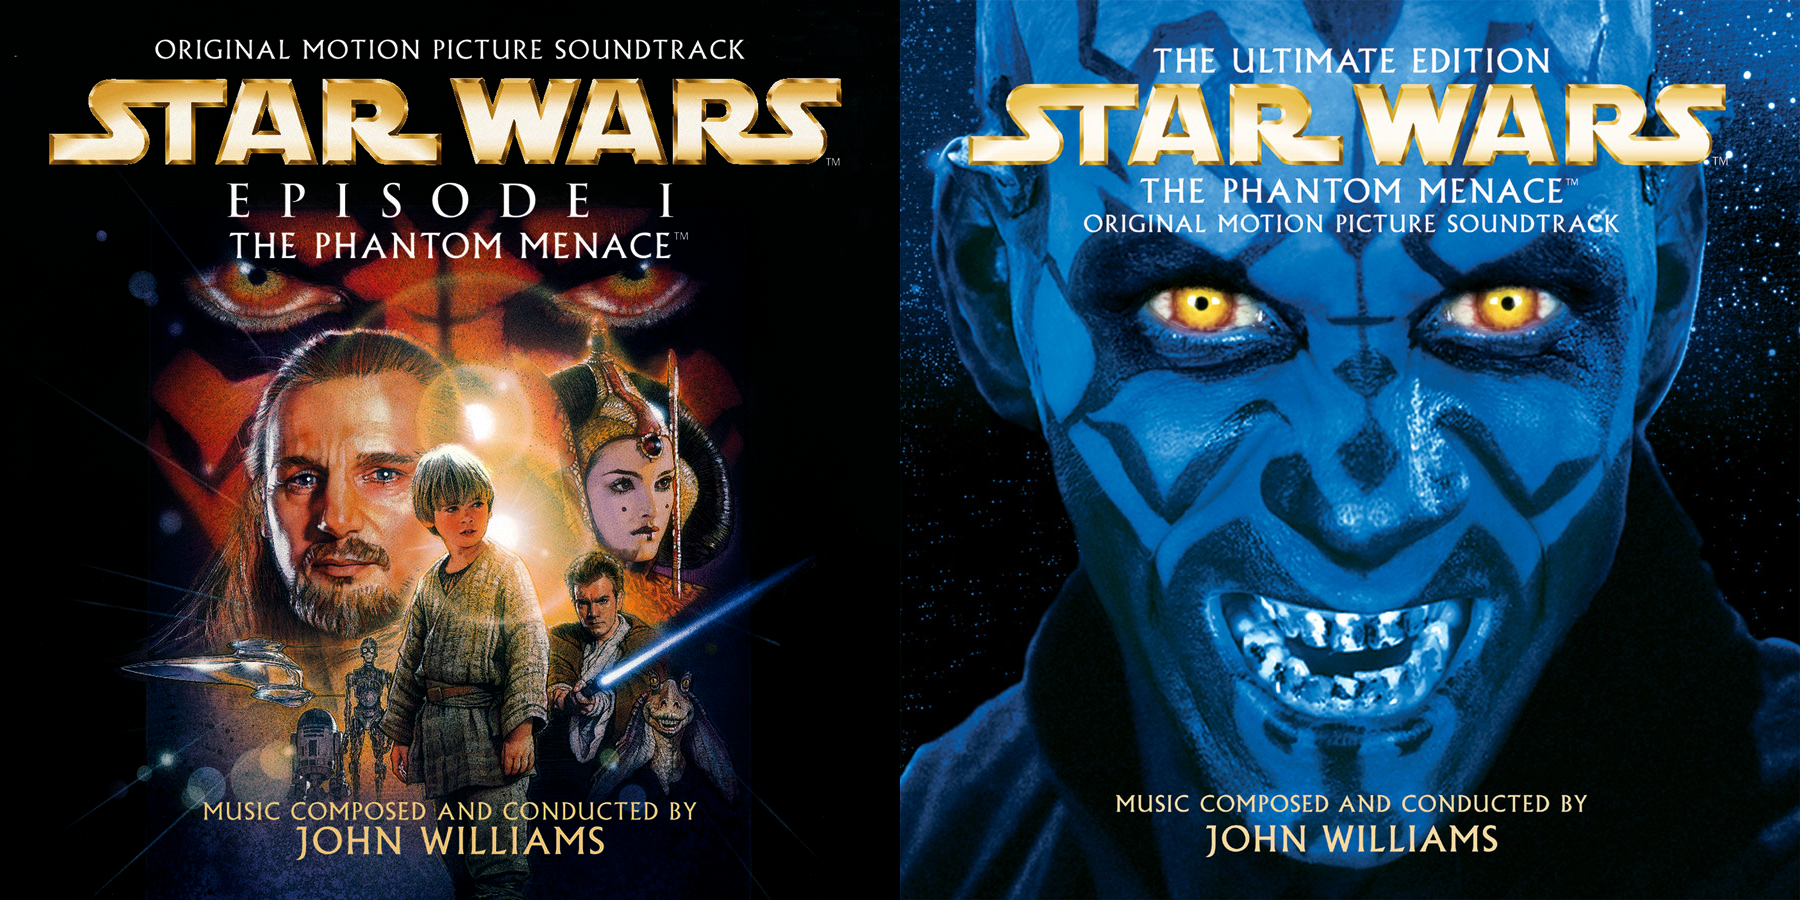 star wars revenge of the sith soundtrack download free